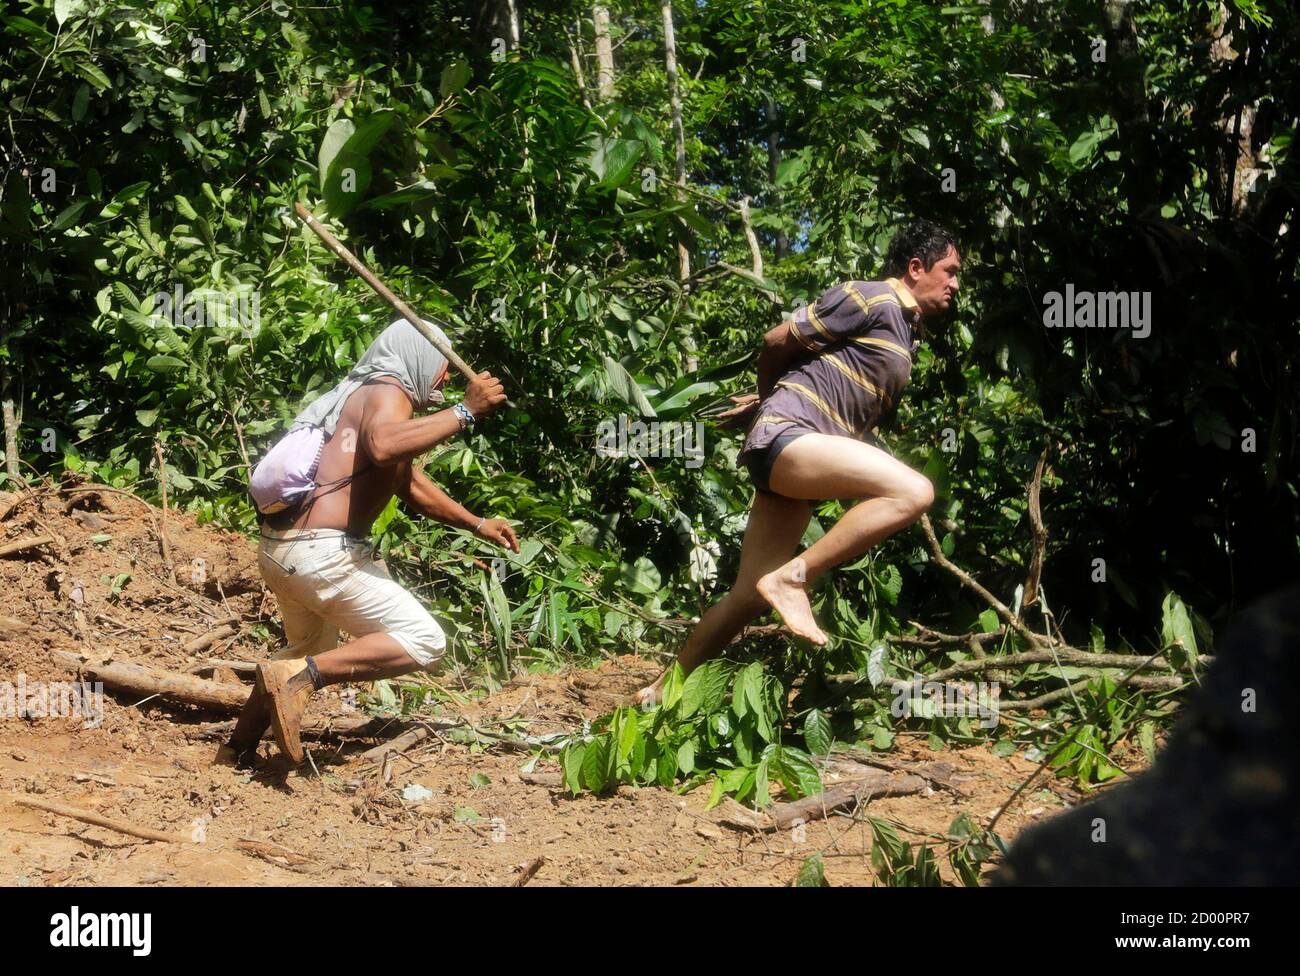 A Ka'apor Indian warrior (L) chases a logger who tried to escape after he  was captured during a jungle expedition to search for and expel loggers  from the Alto Turiacu Indian territory,